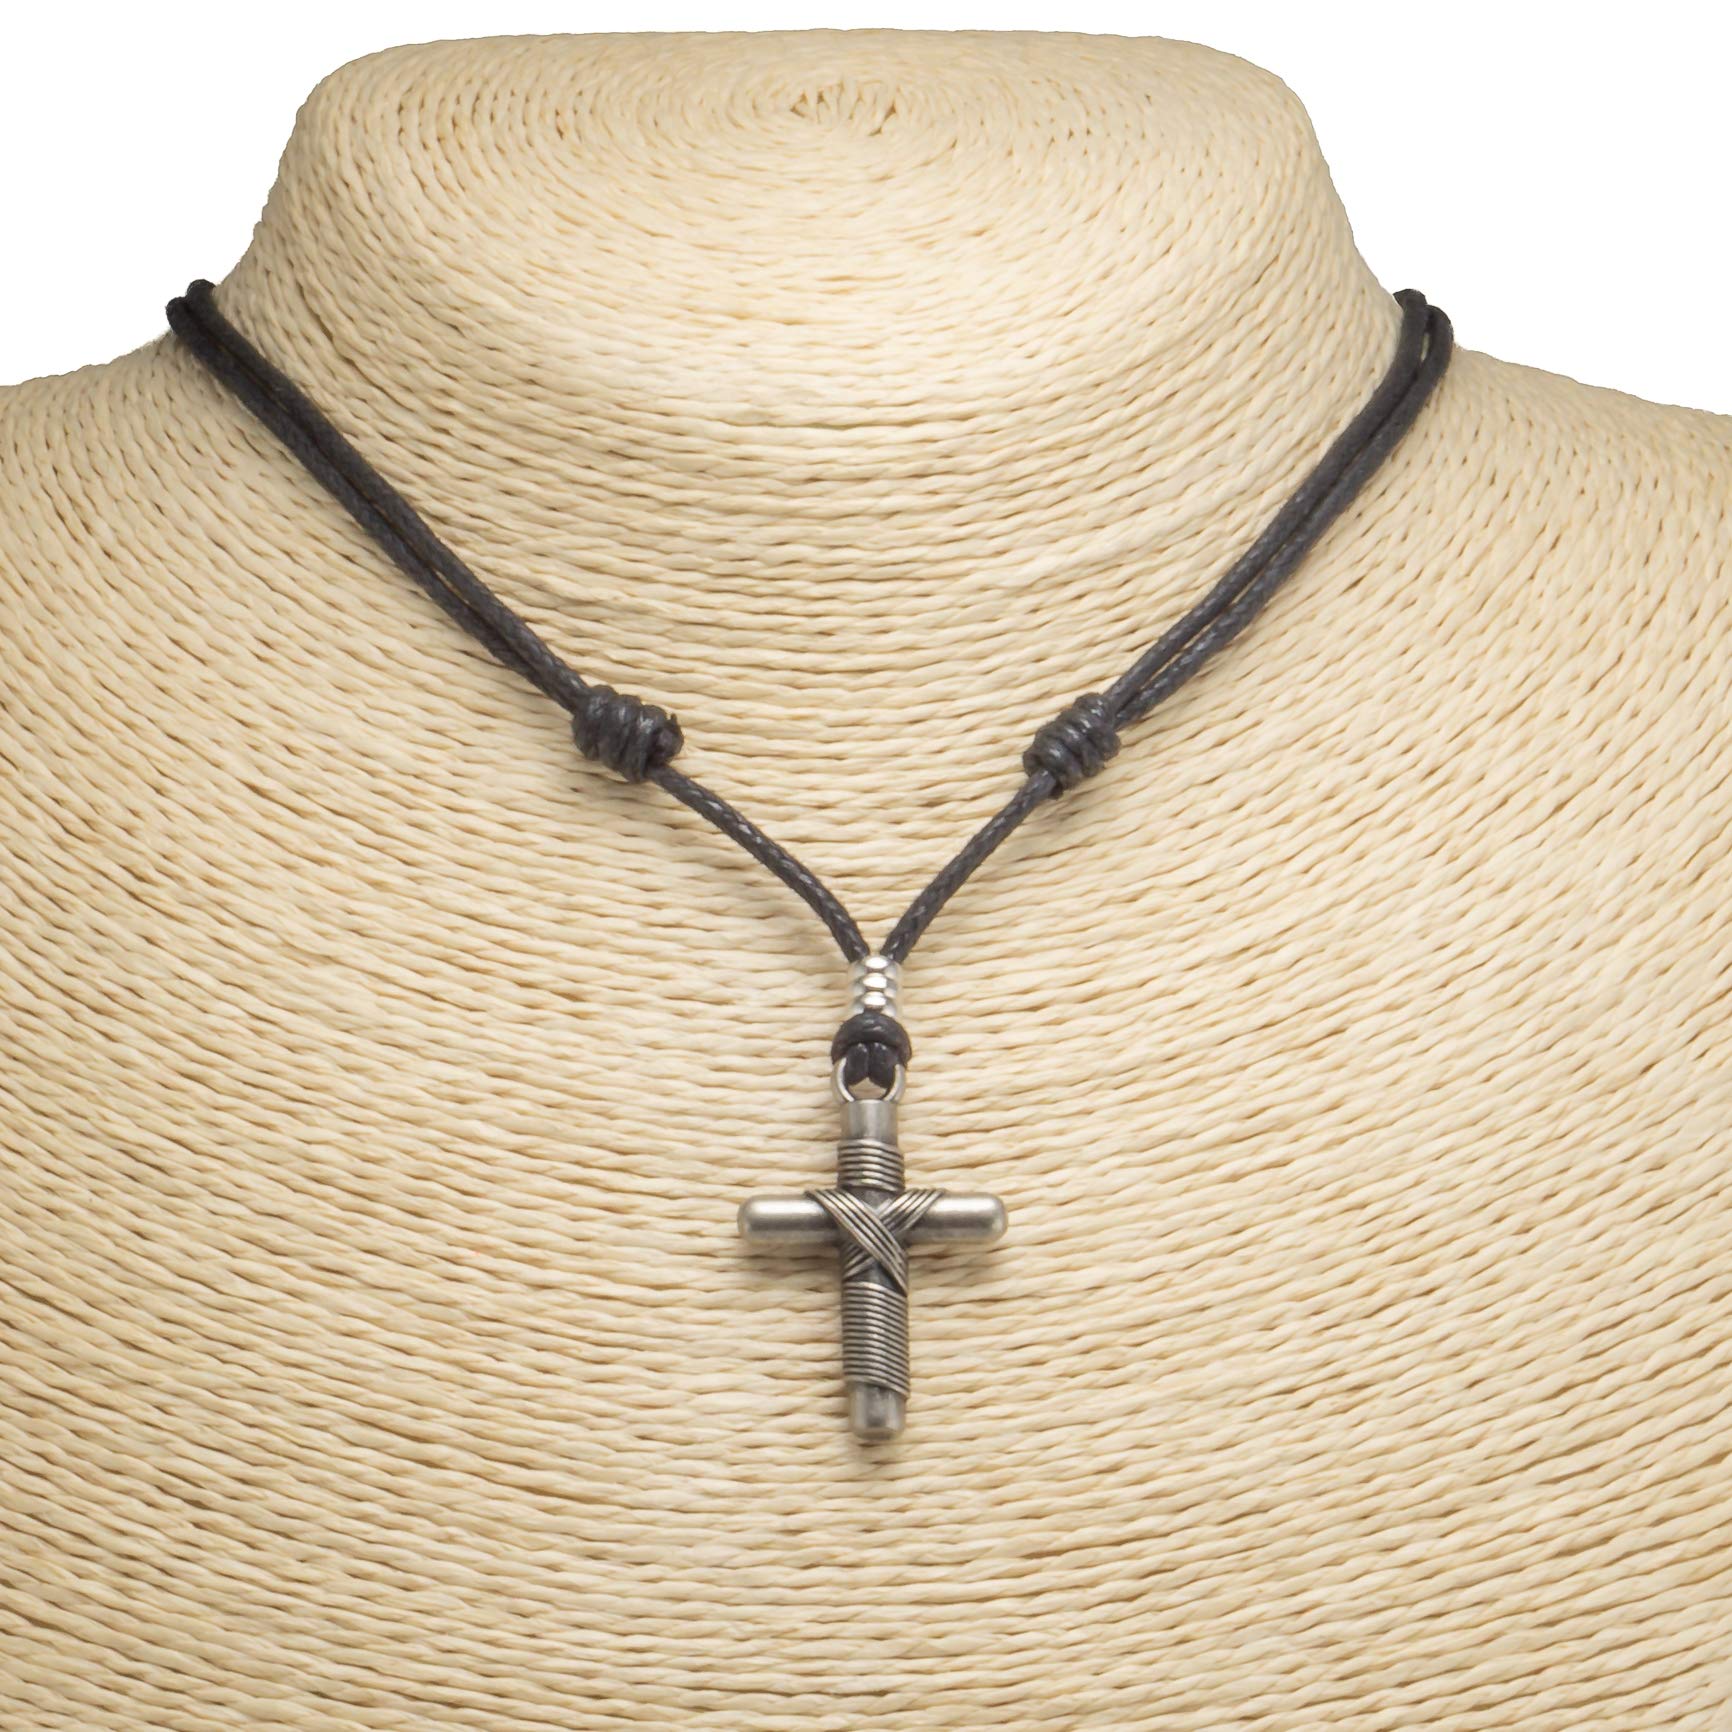 Wrapped Cross Pendant on Adjustable Rope Necklace